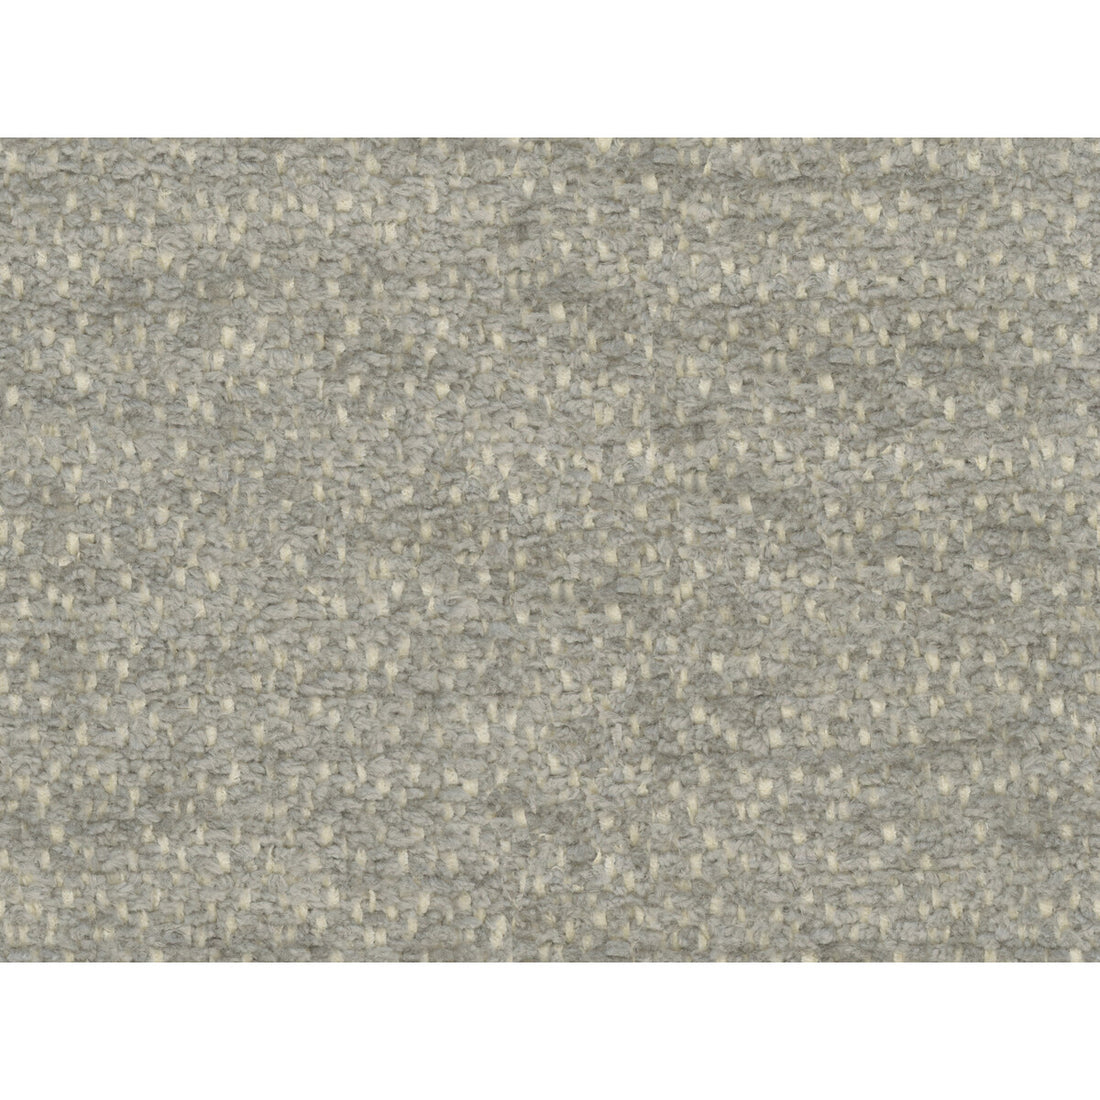 Bourget Chenille fabric in grey color - pattern 8016108.11.0 - by Brunschwig &amp; Fils in the Chambery Textures collection